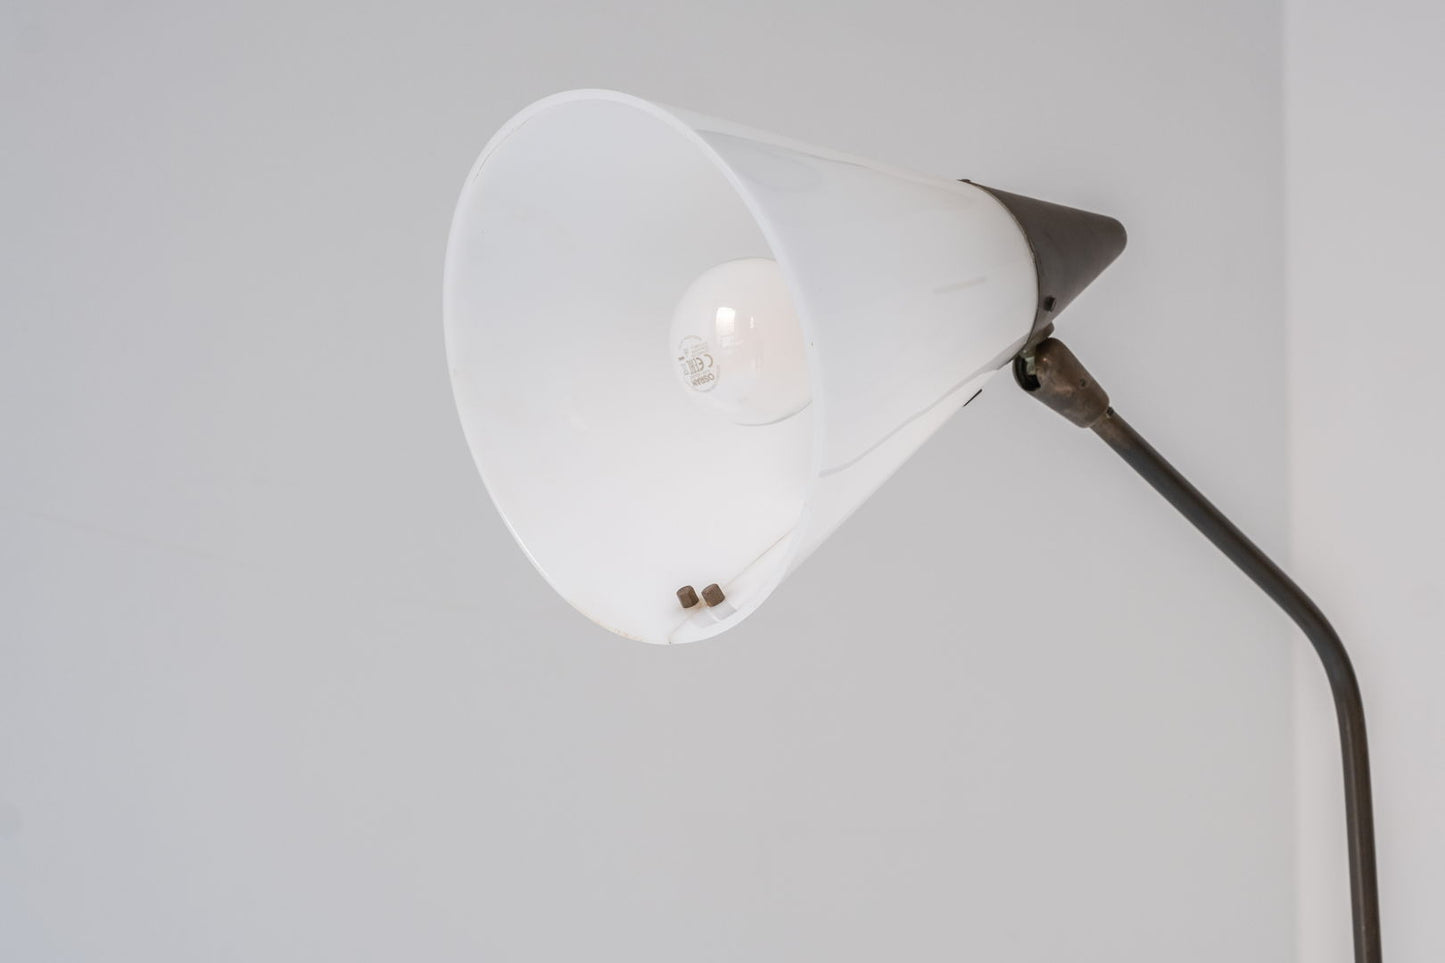 Rare 339-2 PX two armed floor lamp by Angelo and Giuseppe Ostuni & Renato Forti for Oluce, Italy 1952.